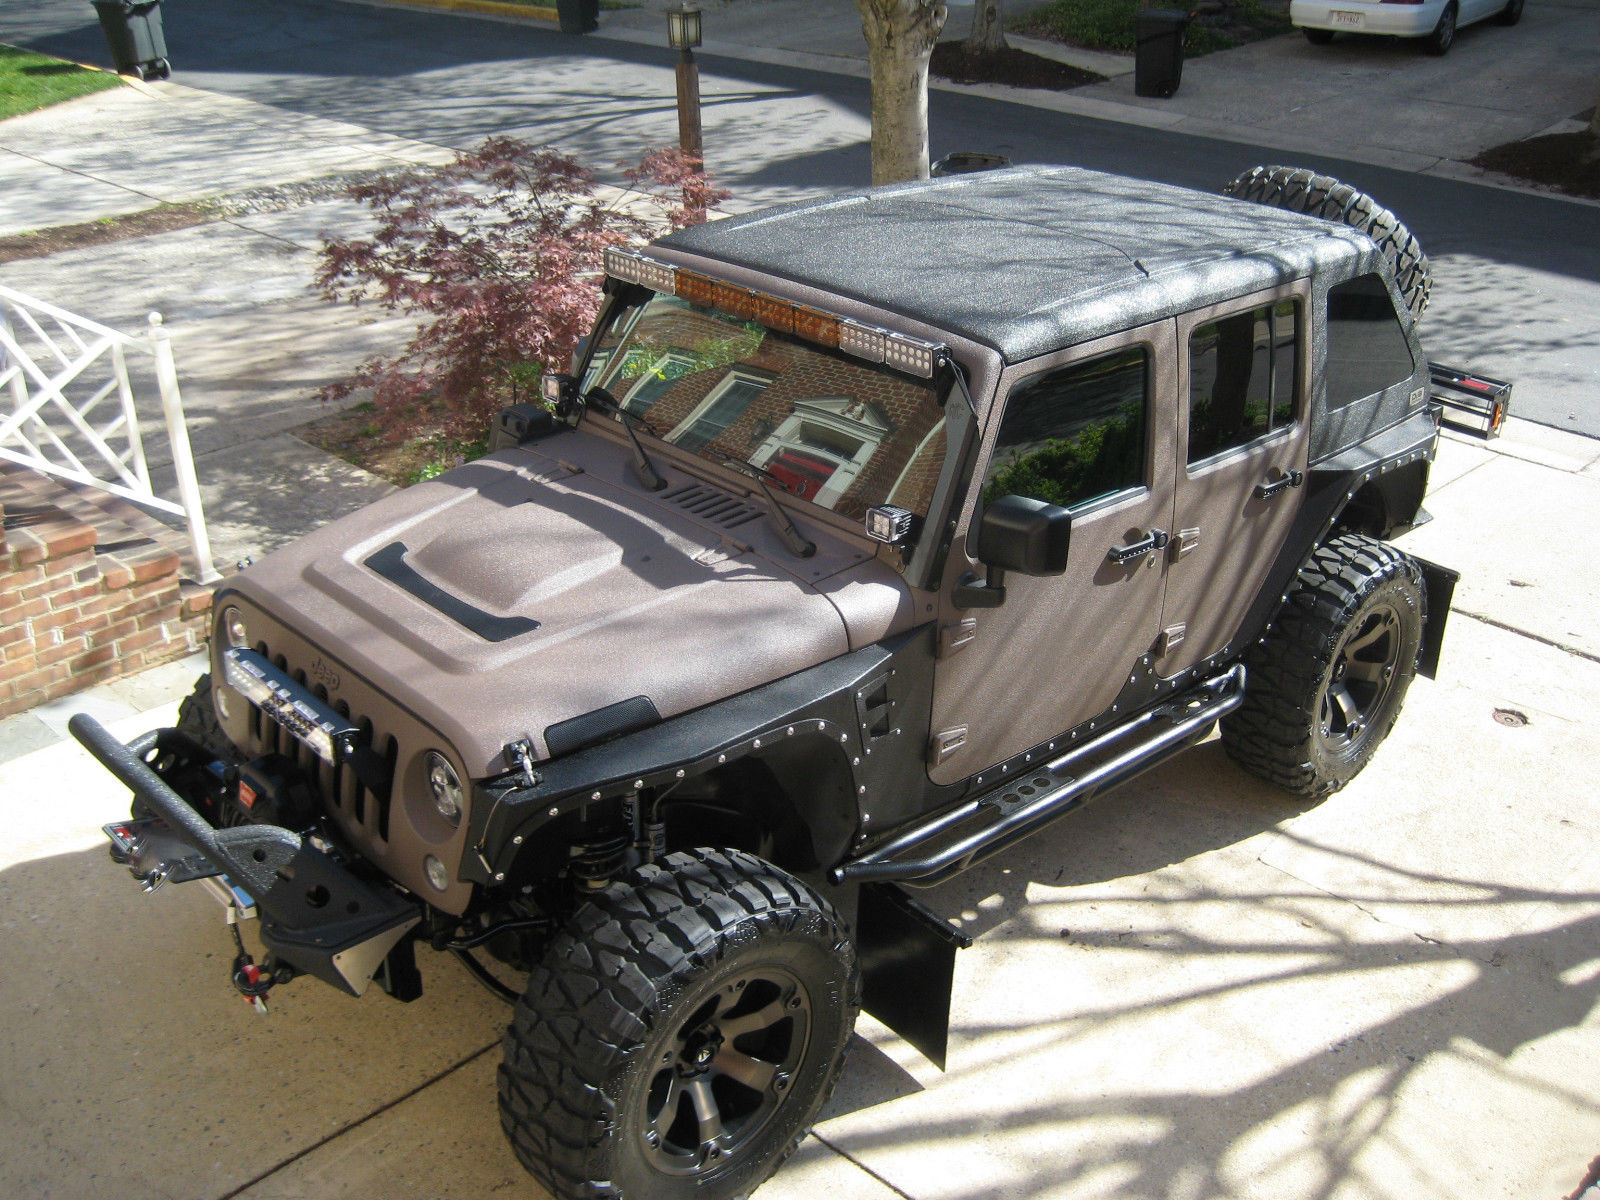 This Is For You!: JEEP WRANGLER: WHAT YOU EXPECT-AND MORE!